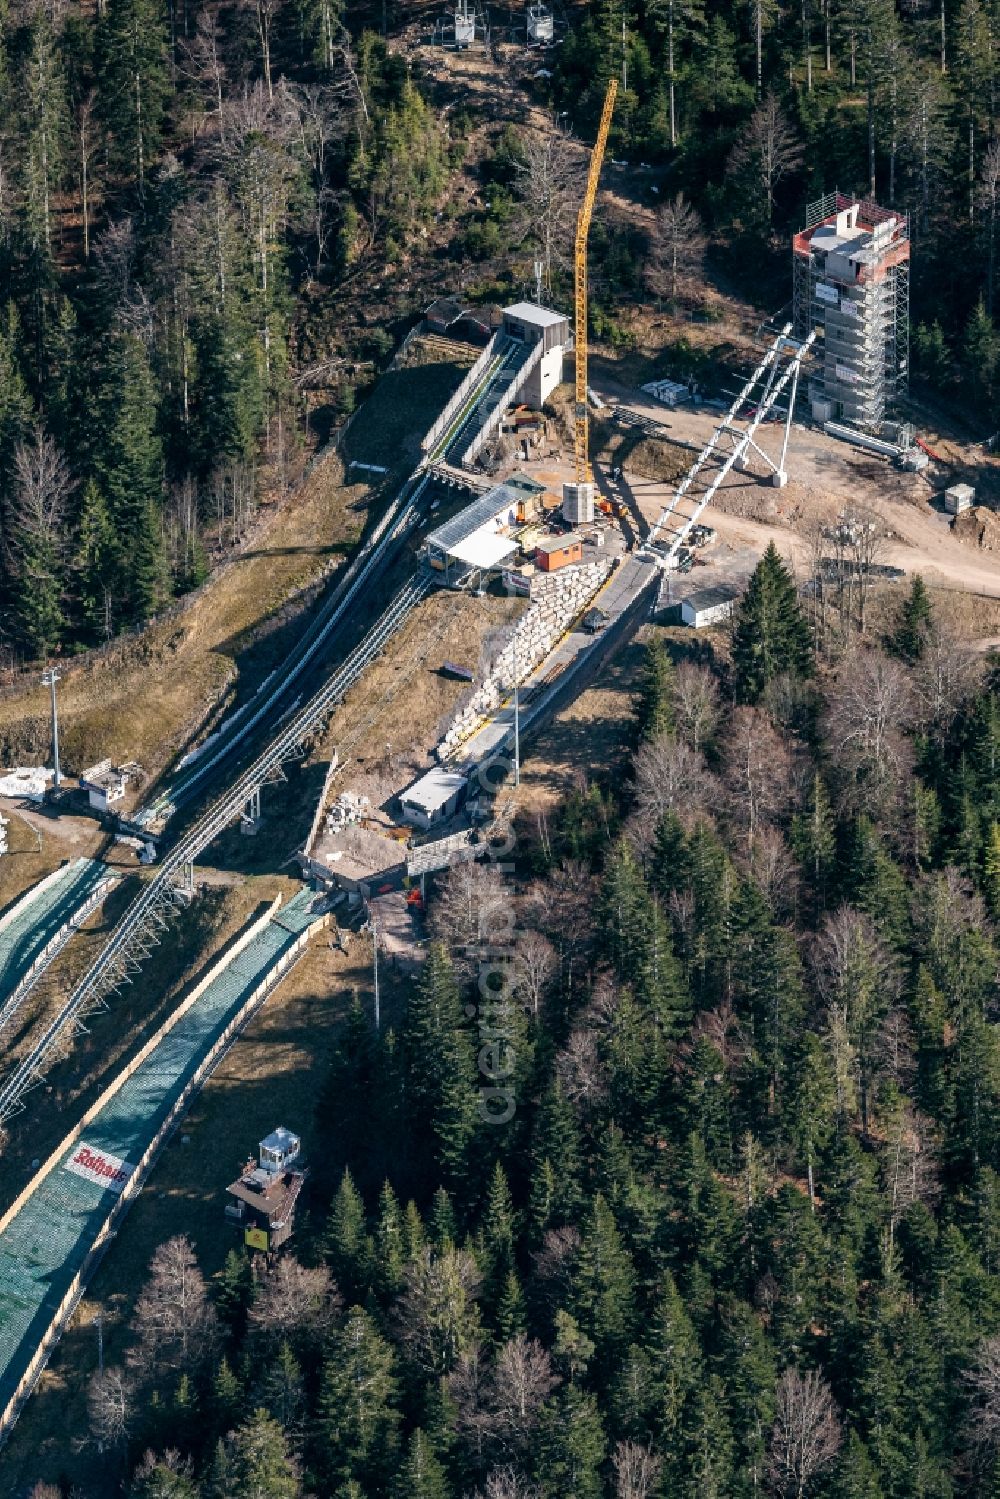 Hinterzarten from above - Training and competitive sports center of the ski jump Baustelle in Hinterzarten in the state Baden-Wuerttemberg, Germany